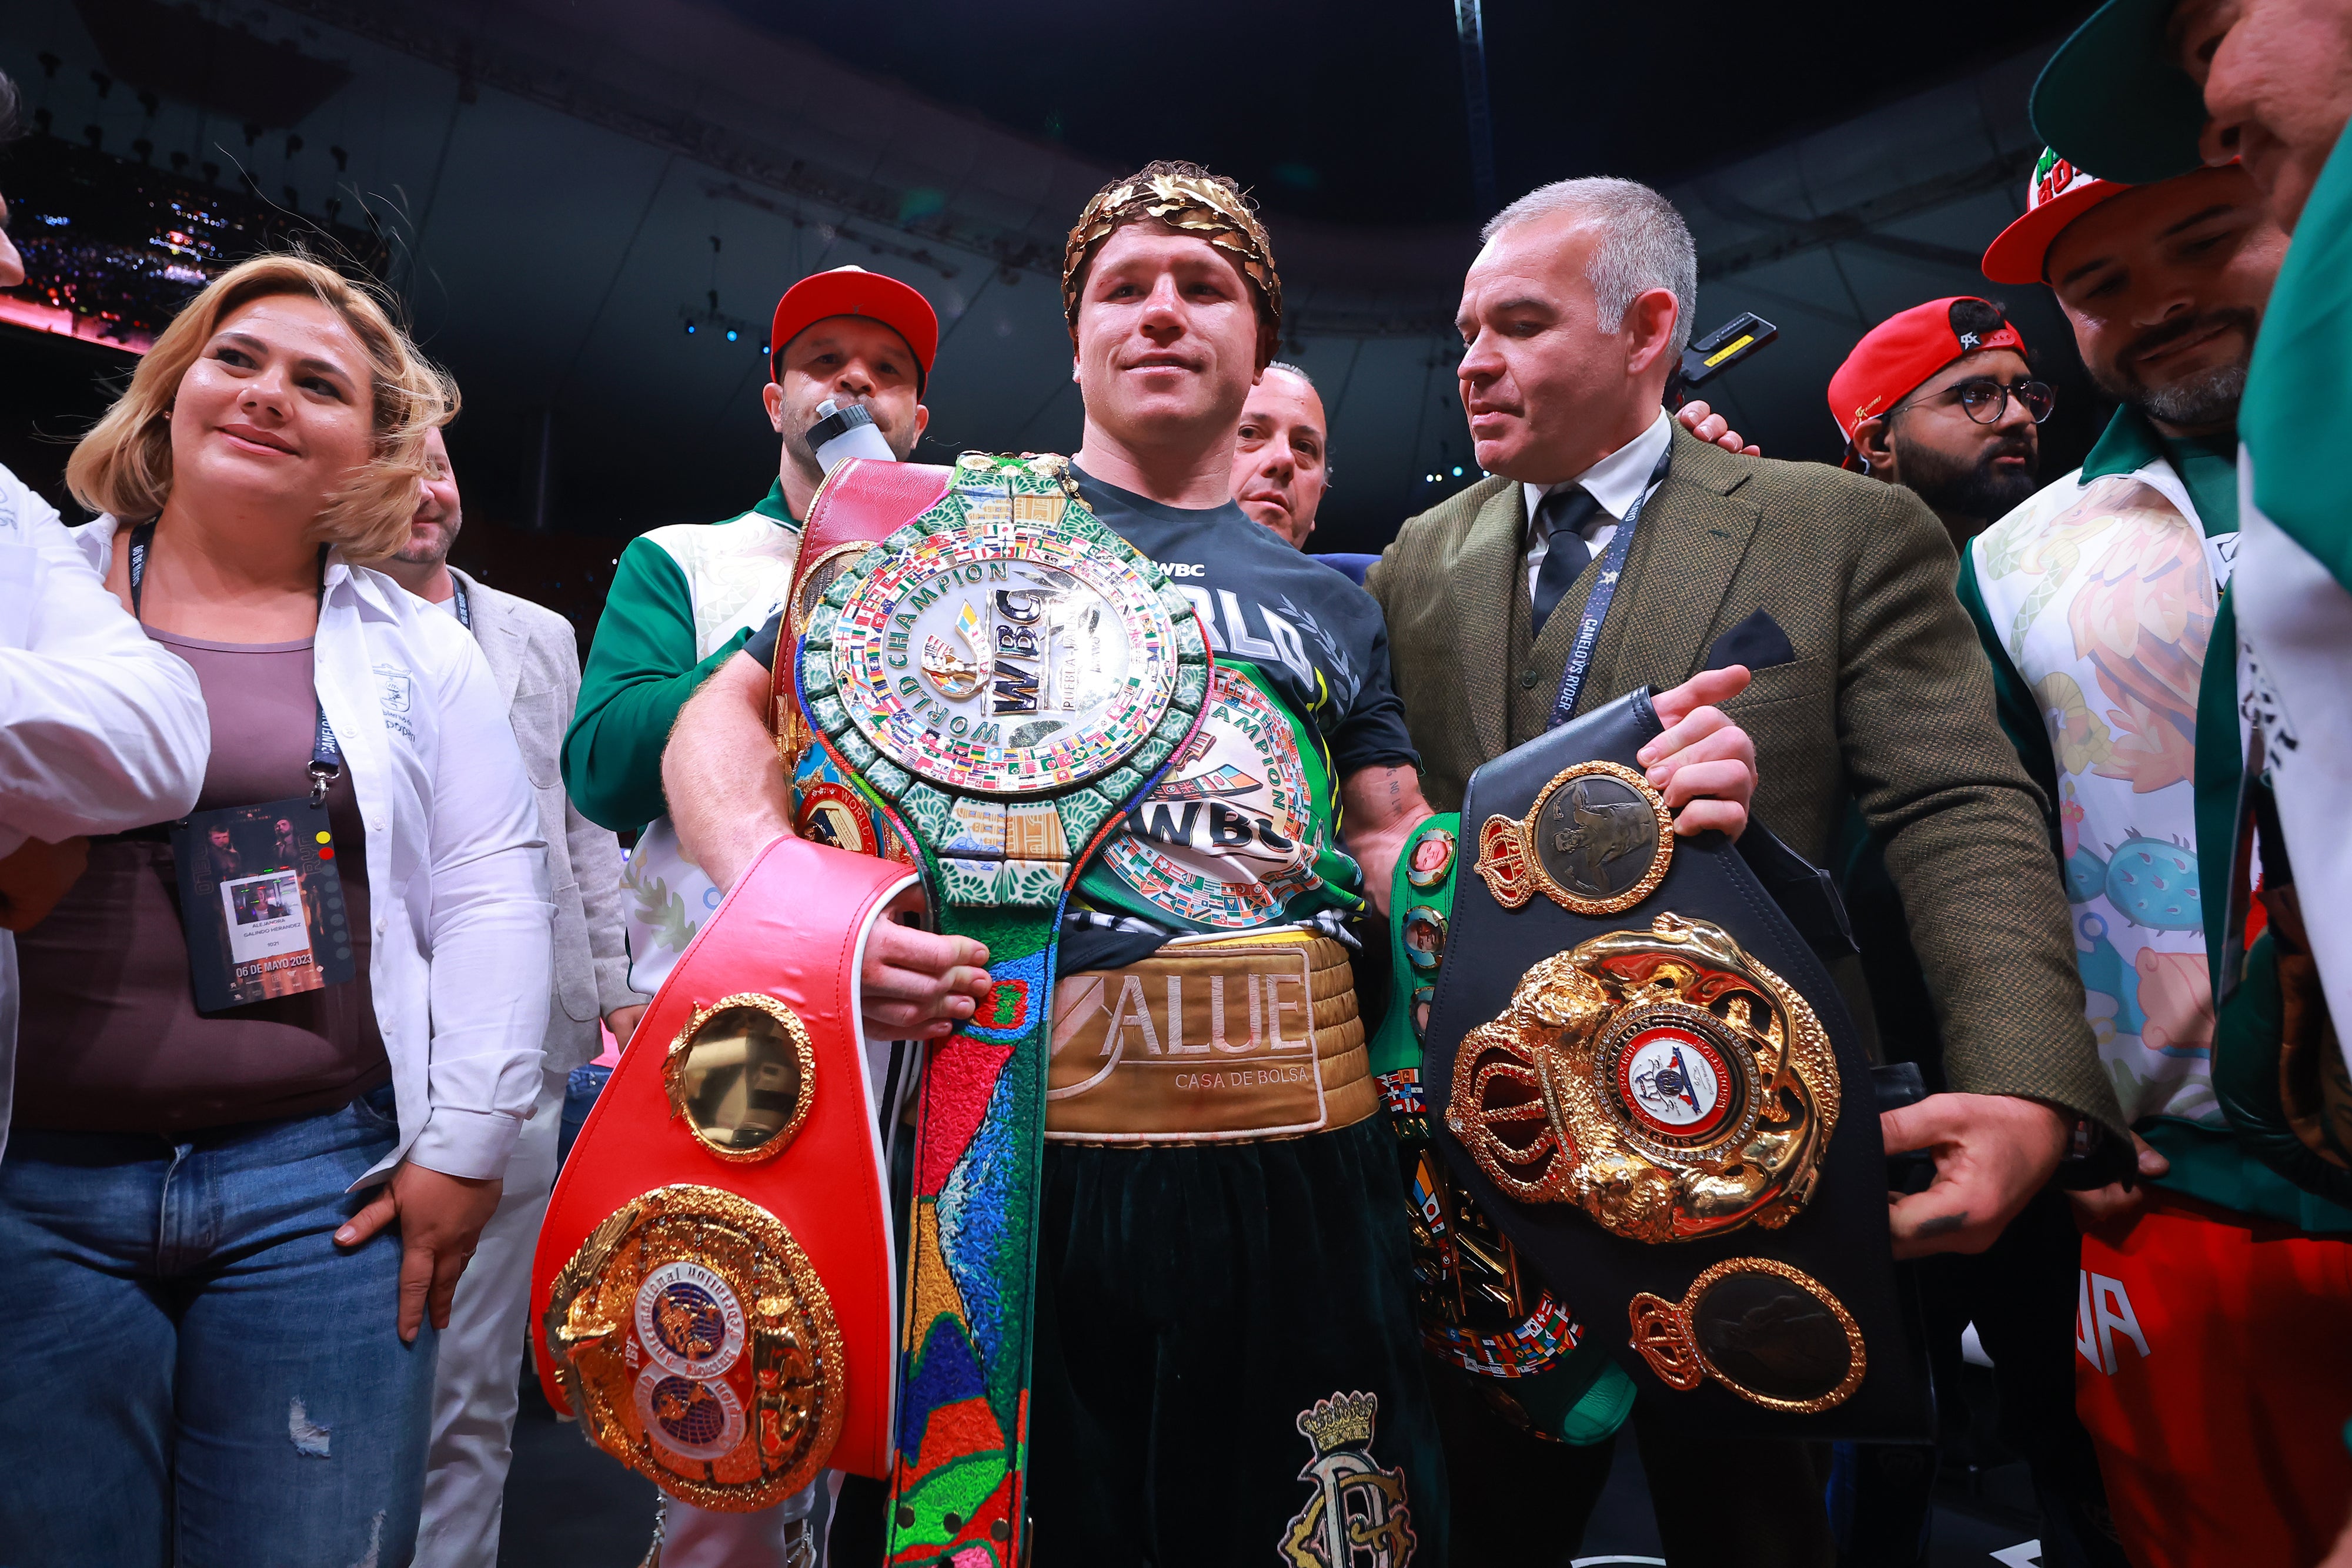 Canelo has been the face of boxing for years